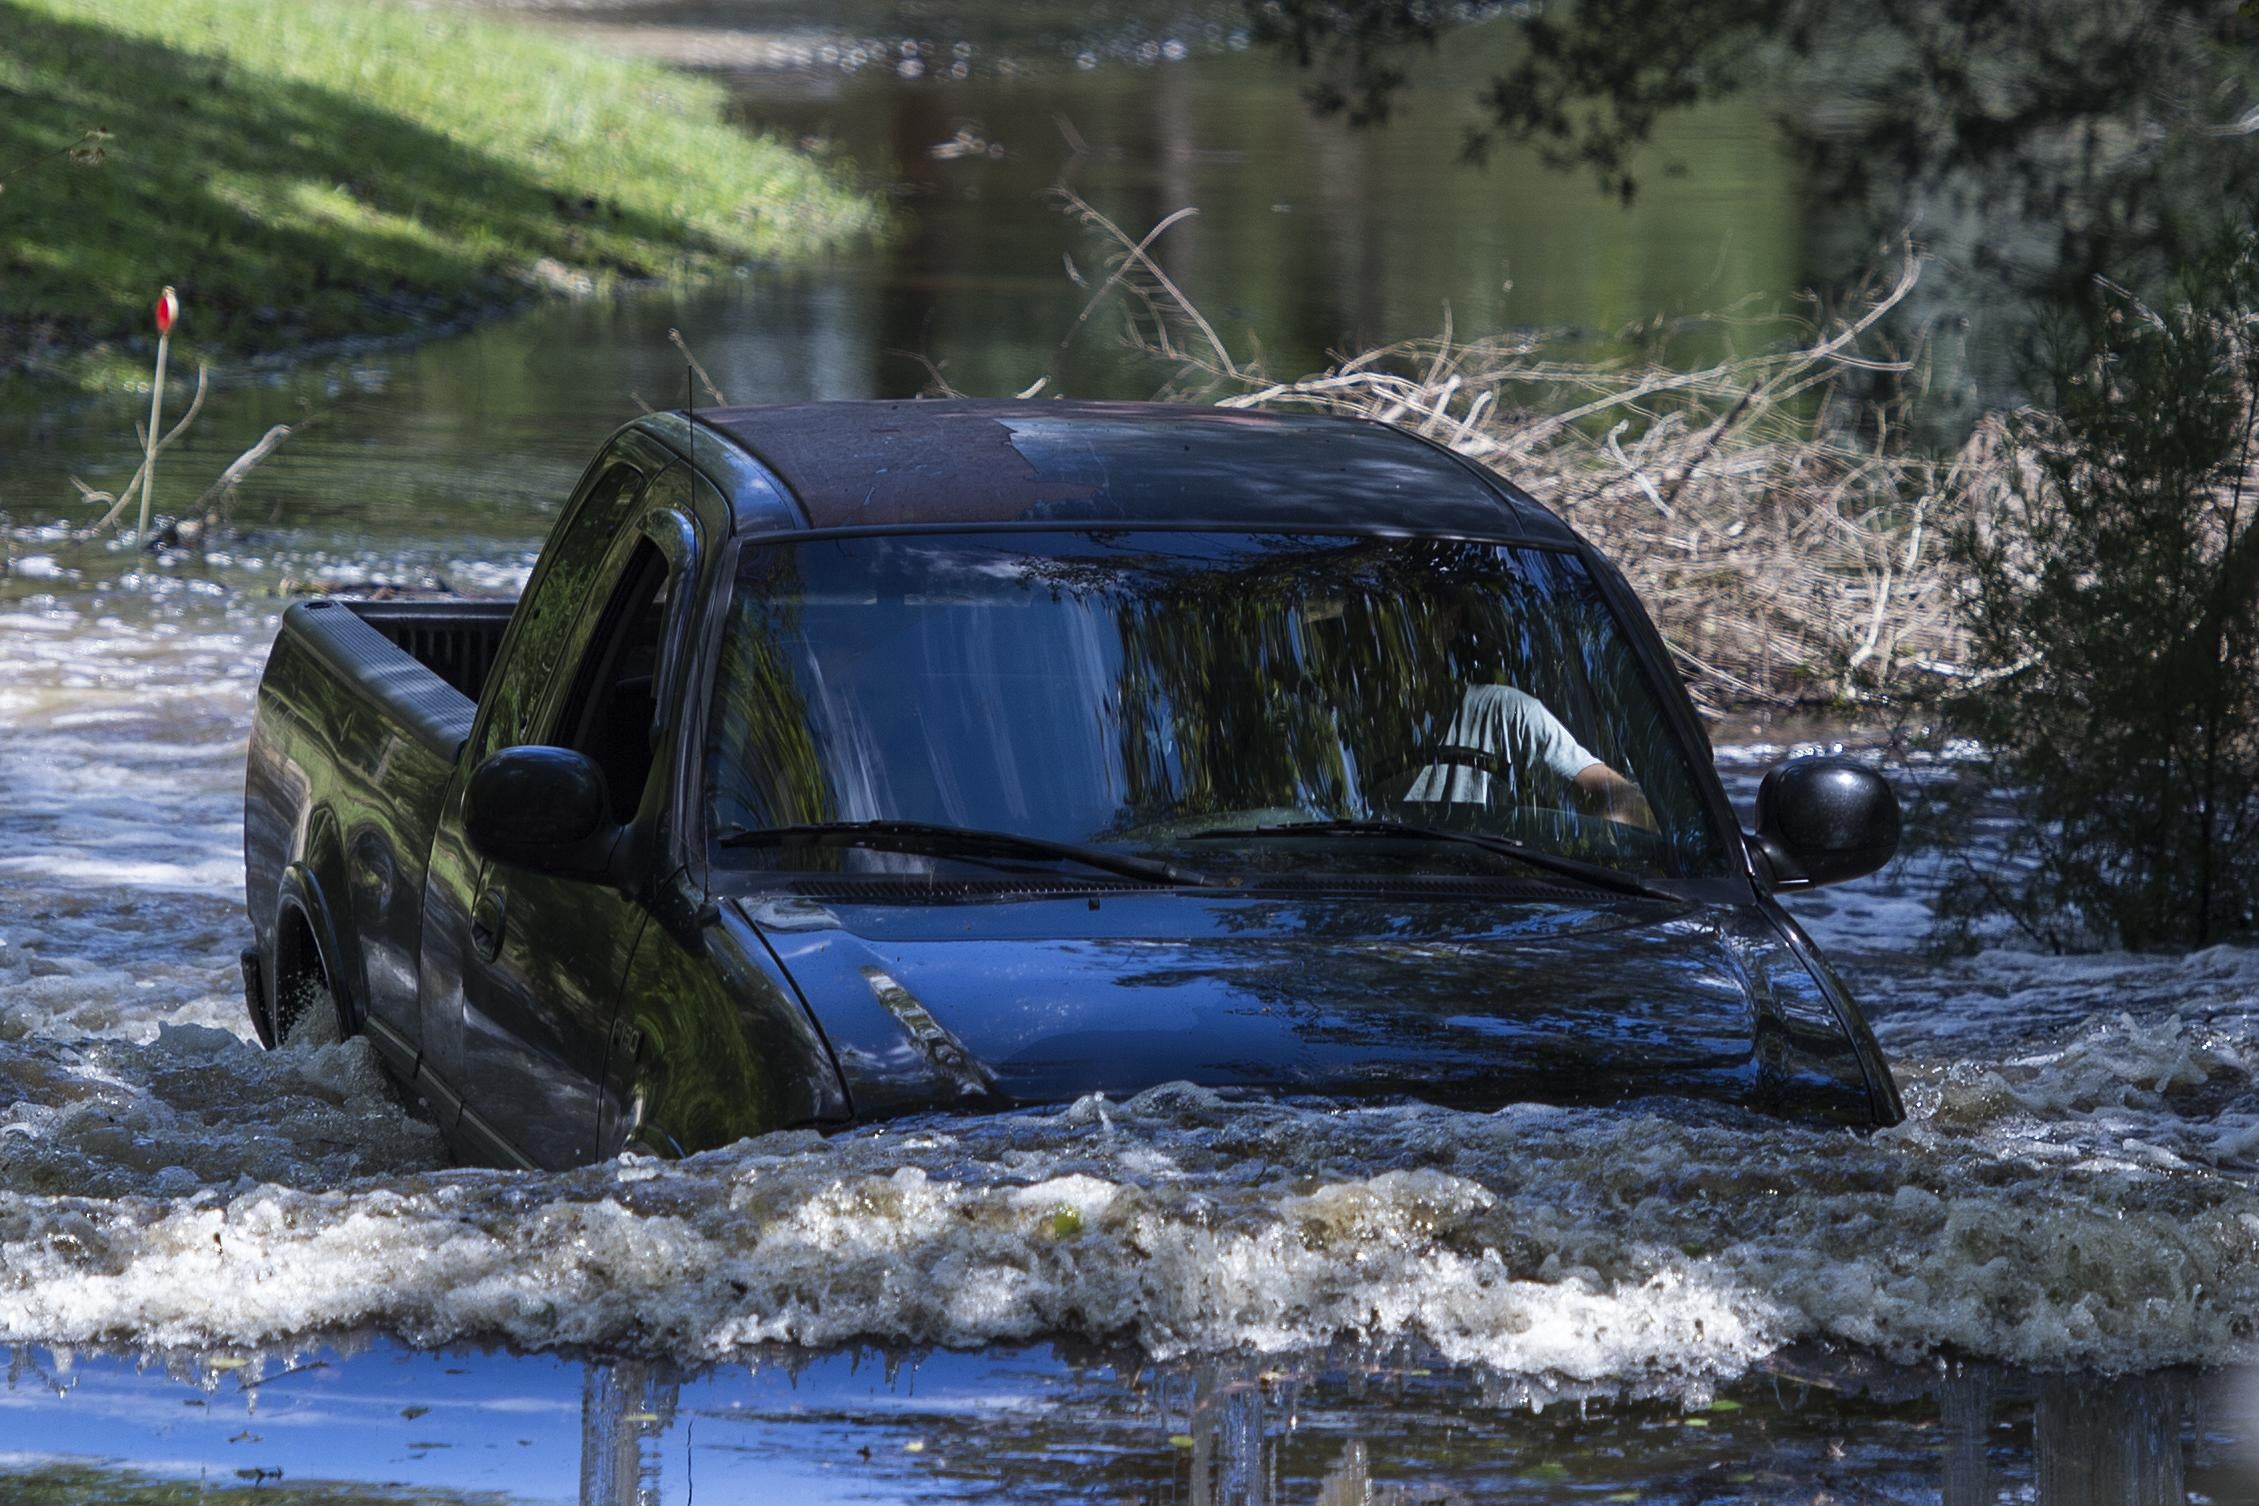 A truck drives through deep flood water in Rhems, North Carolina on September 18, 2018. - Rain-gorged rivers threatened further flooding on the storm-battered US East Coast Monday as the death toll from Hurricane Florence, now a tropical depression, jumped to 31. (Photo by Andrew CABALLERO-REYNOLDS / AFP)        (Photo credit should read ANDREW CABALLERO-REYNOLDS/AFP/Getty Images)